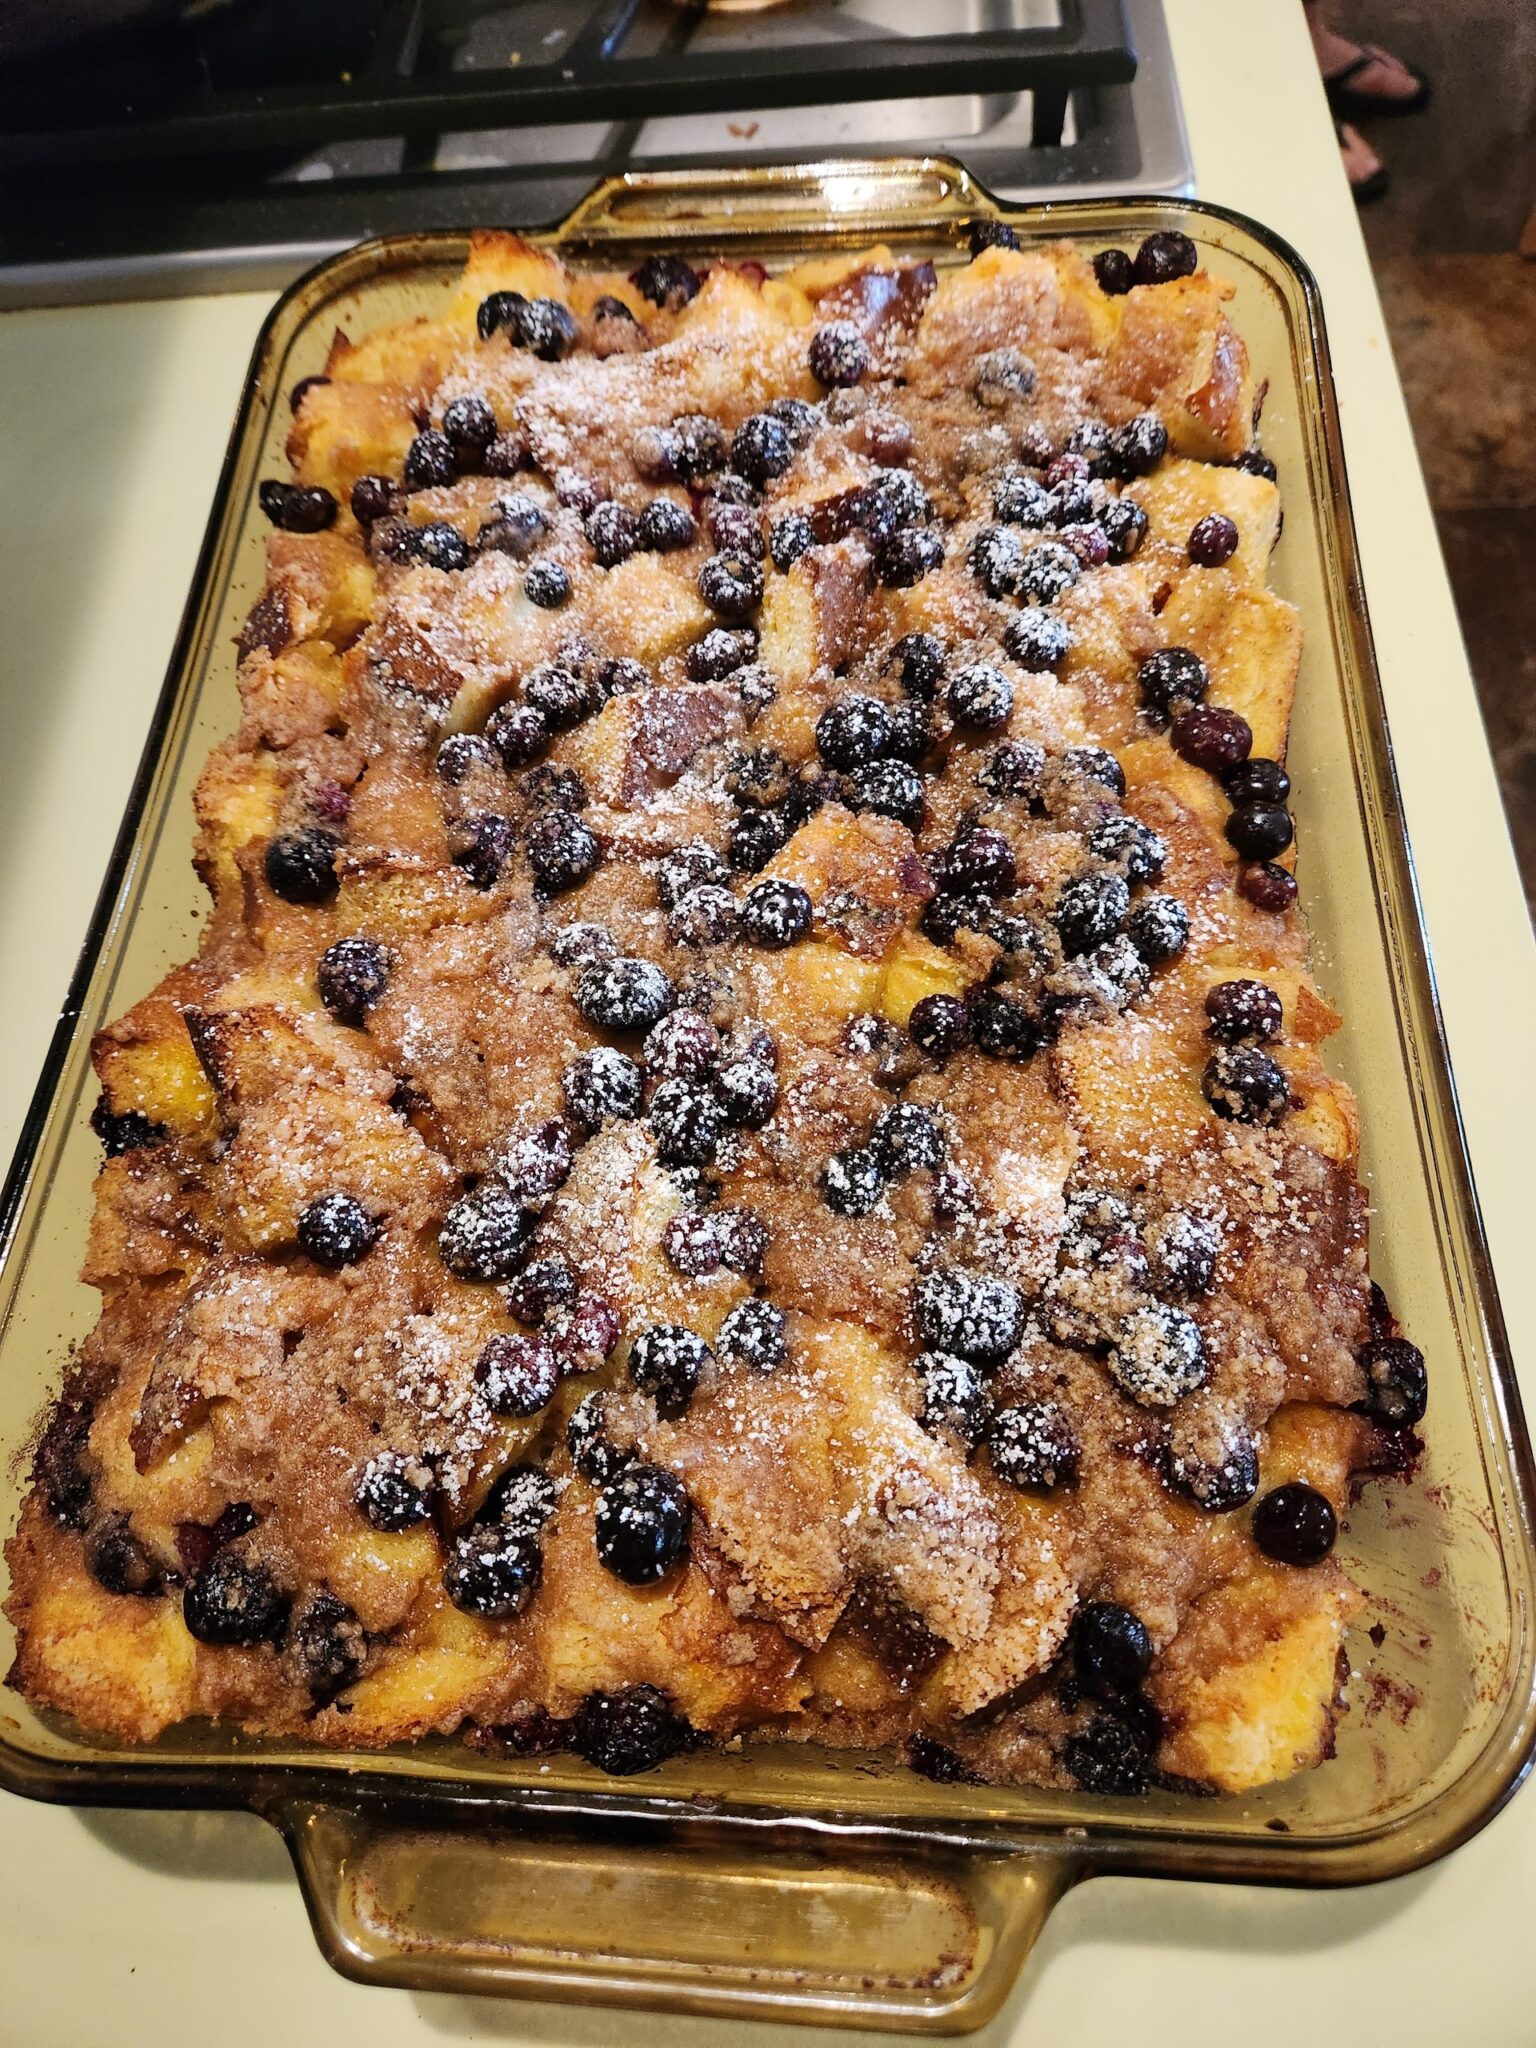 Blueberry French Toast Crumble in the Pan